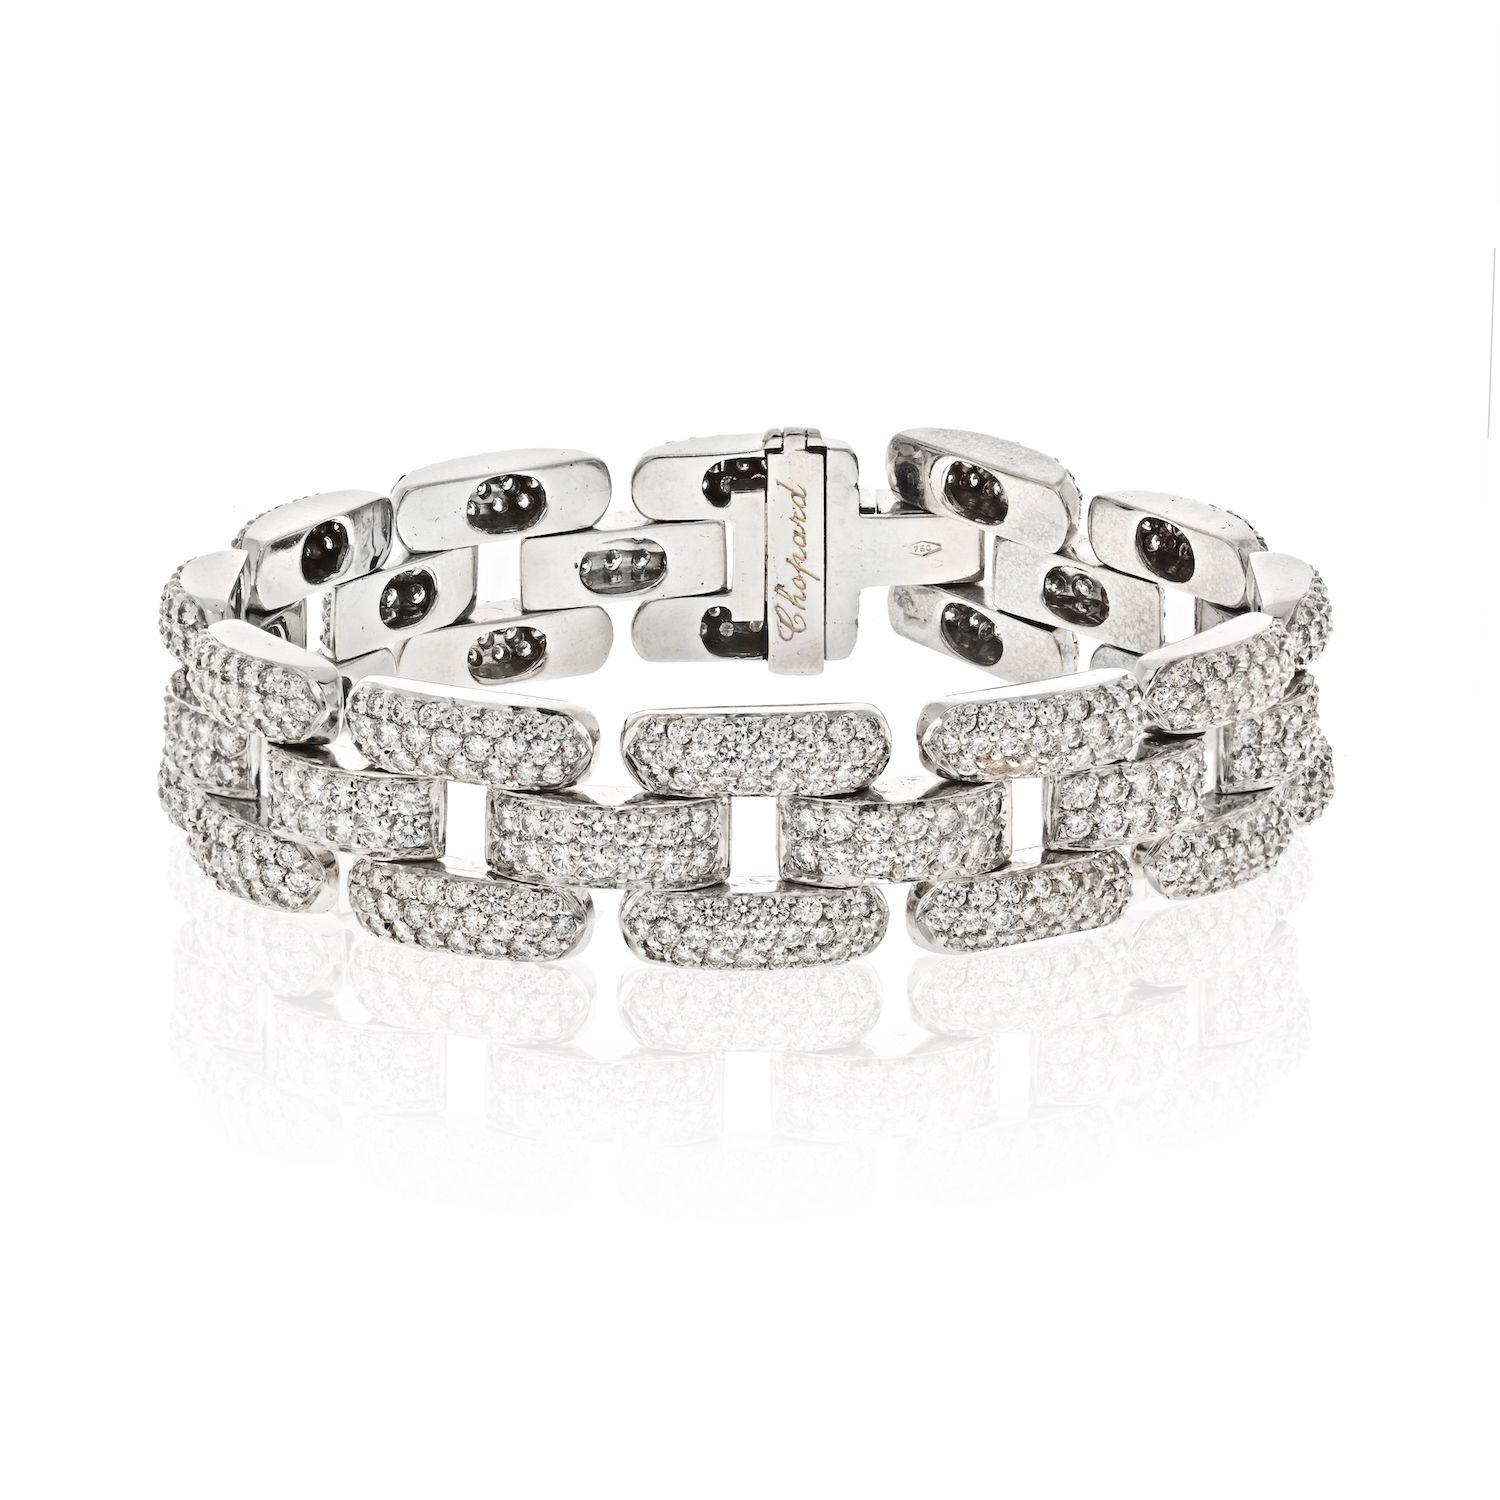 Classic link bracelet is all a woman needs for her every day accessory. Yes you will be surprised how little does it take to make a woman happy, say this diamond bracelet with smooth set round micro pave diamonds can become the perfect gift. Best of